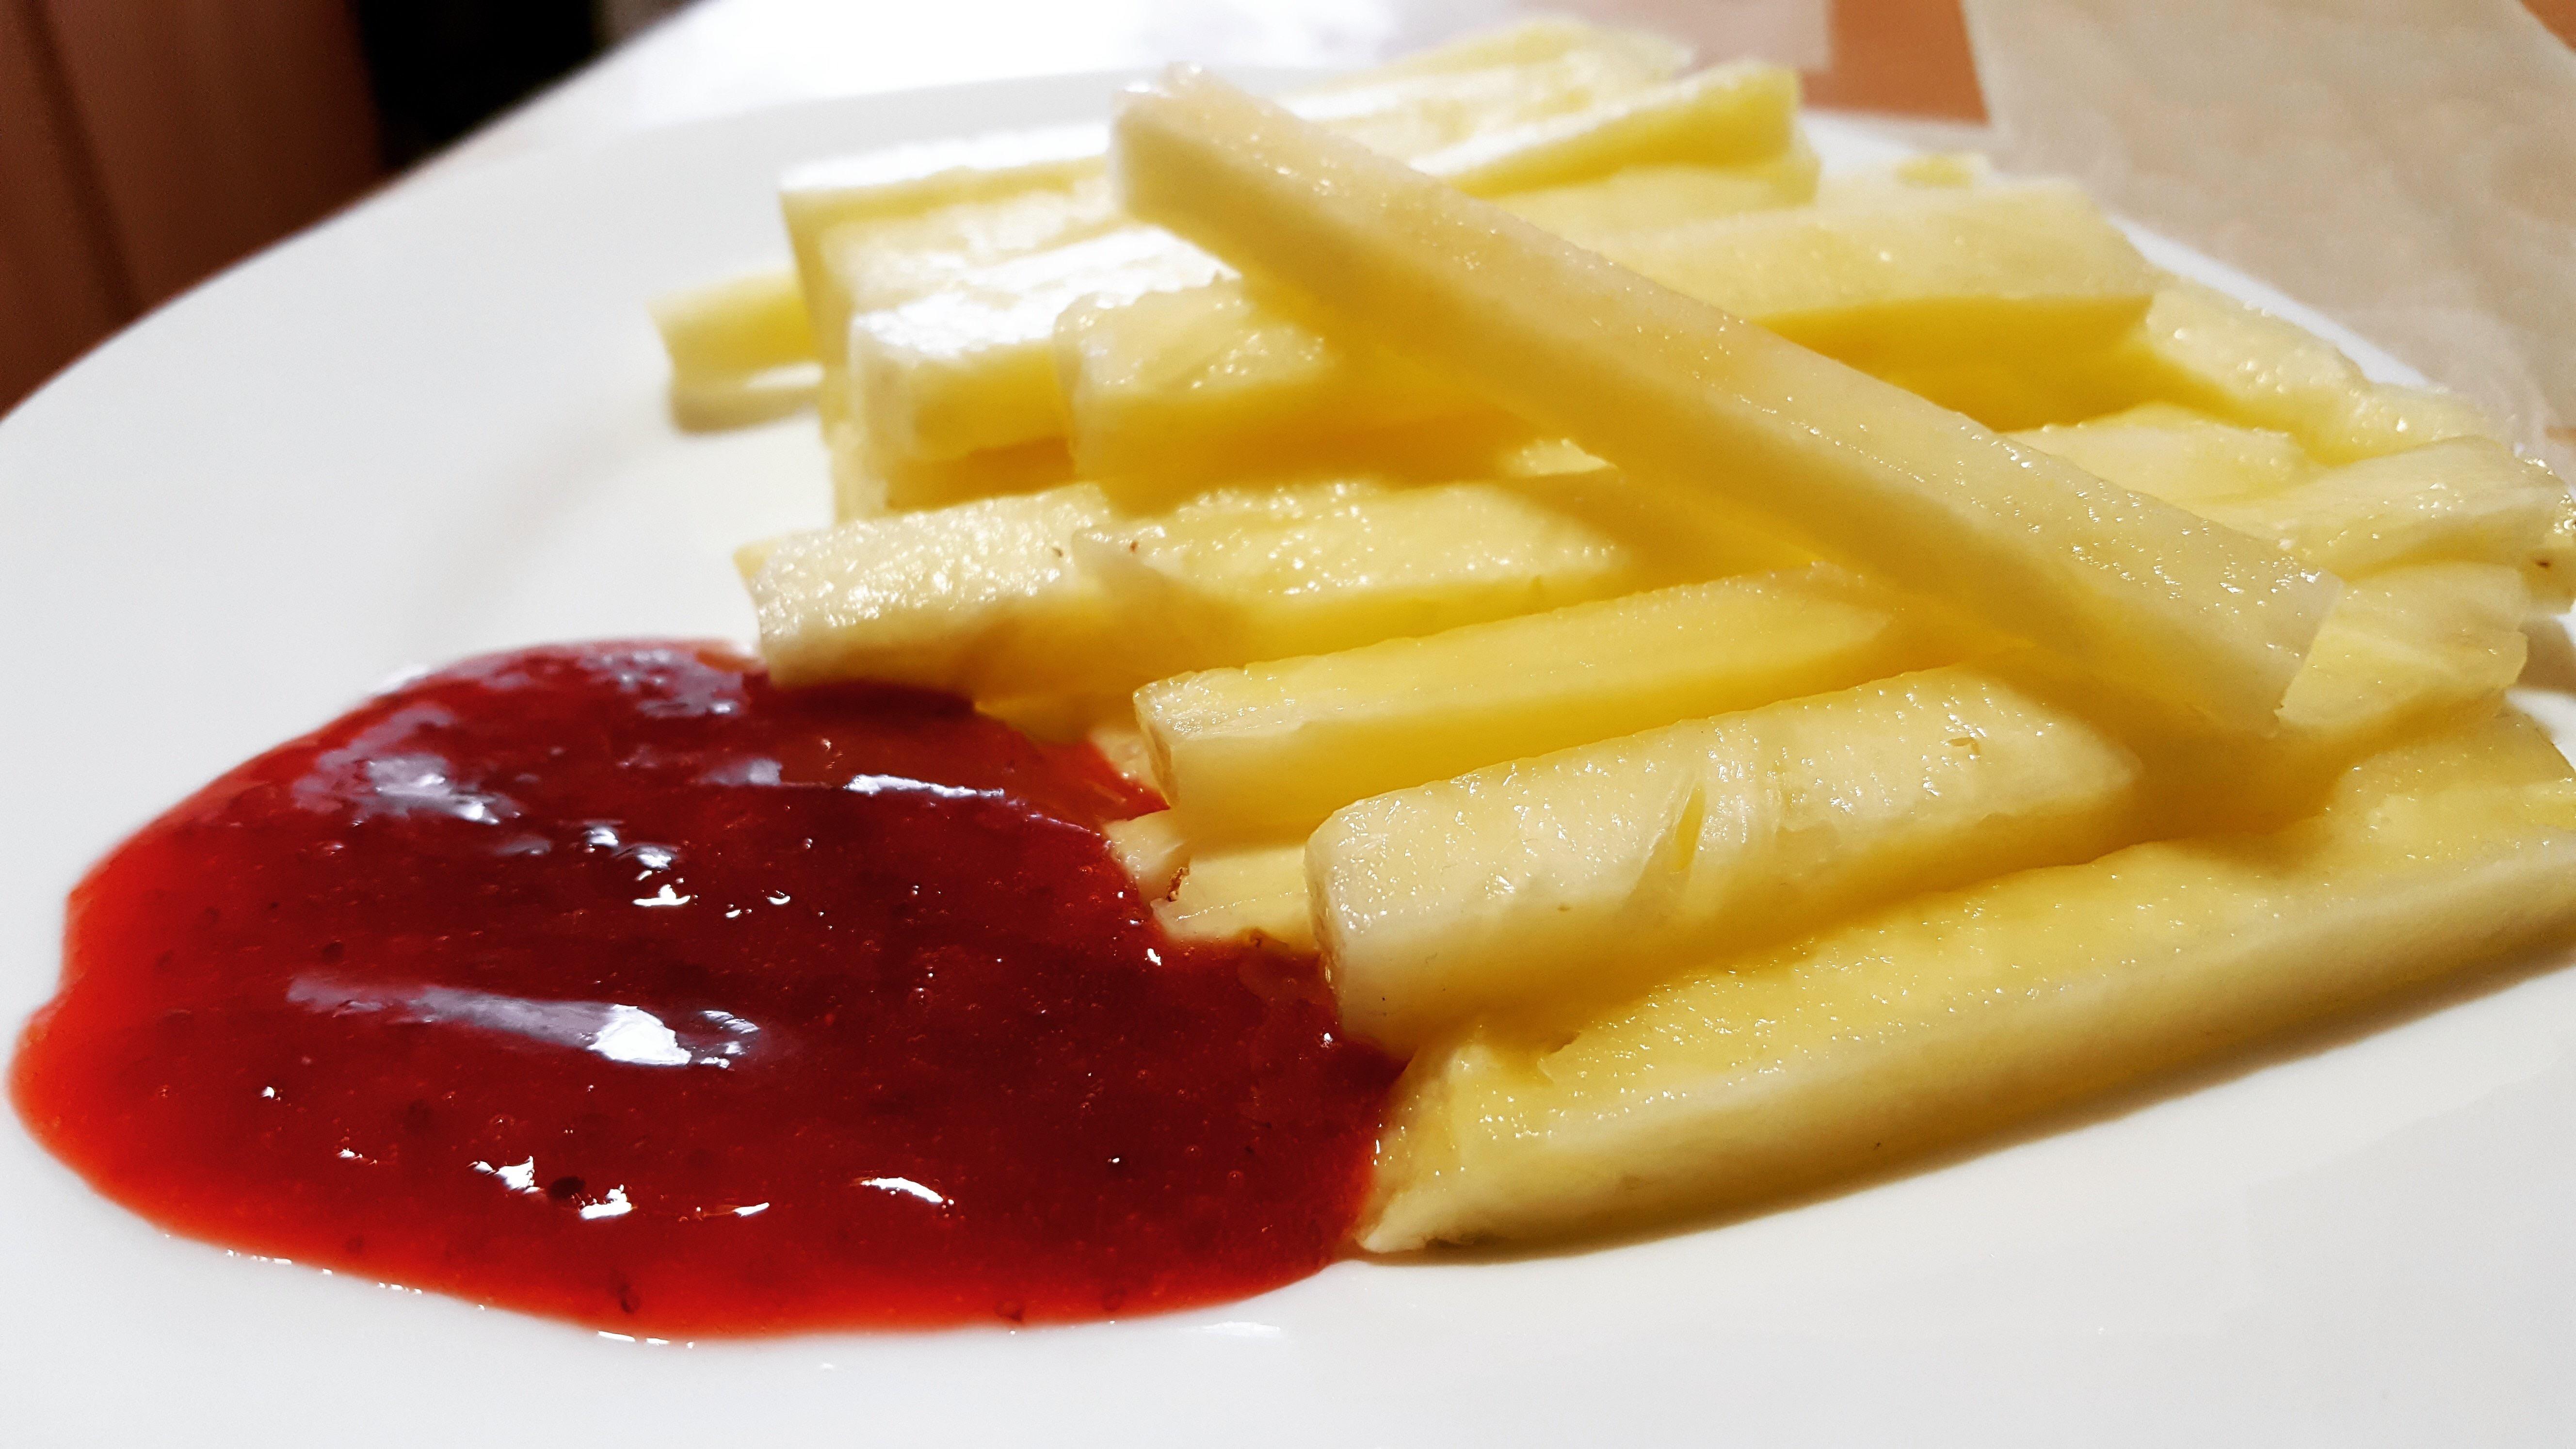 I'll take a side of pineapple fries and strawberry ketchup